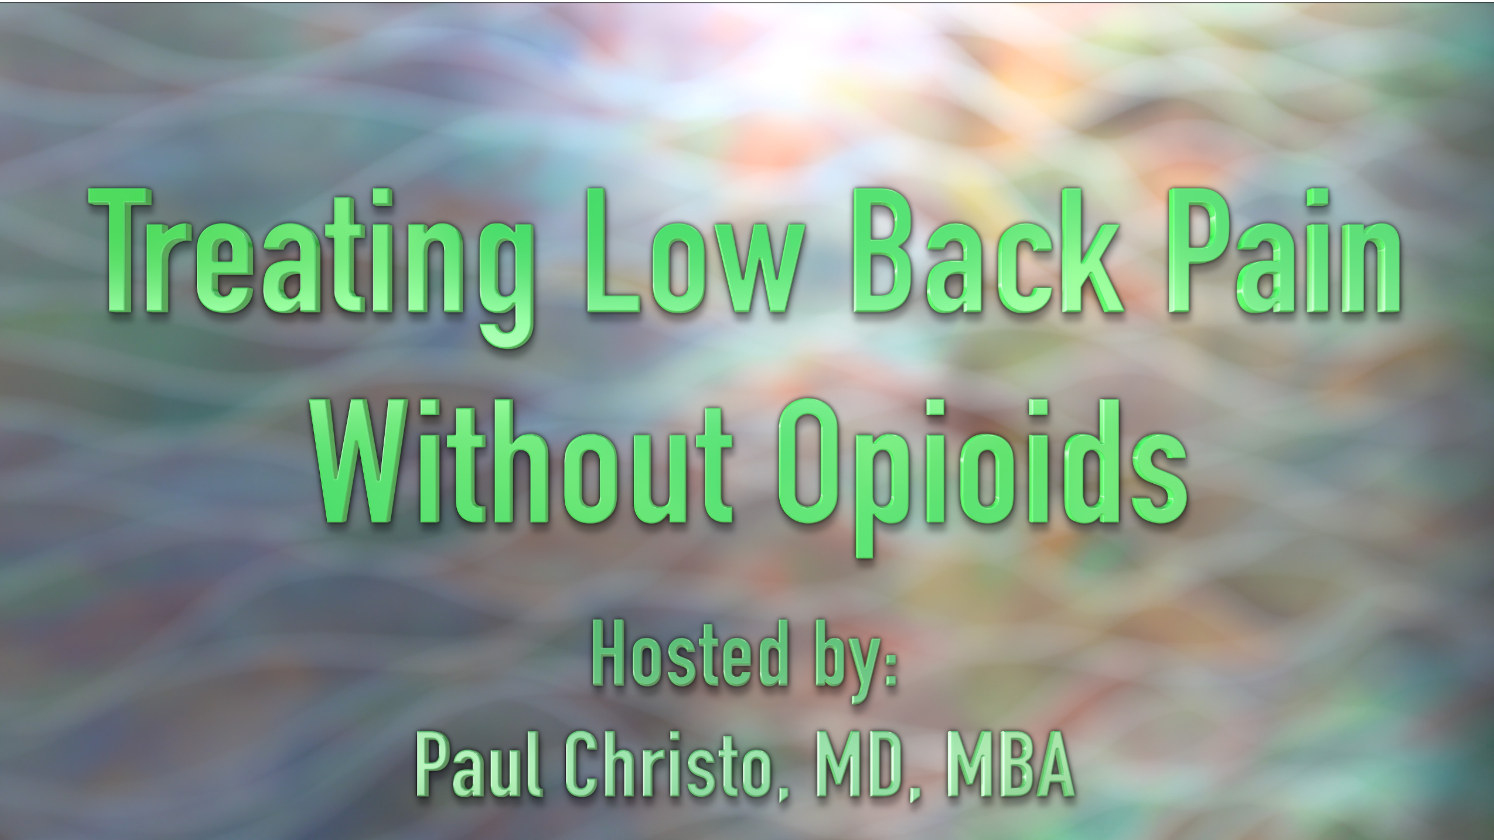 Treating Lower Back Pain Without Opioids